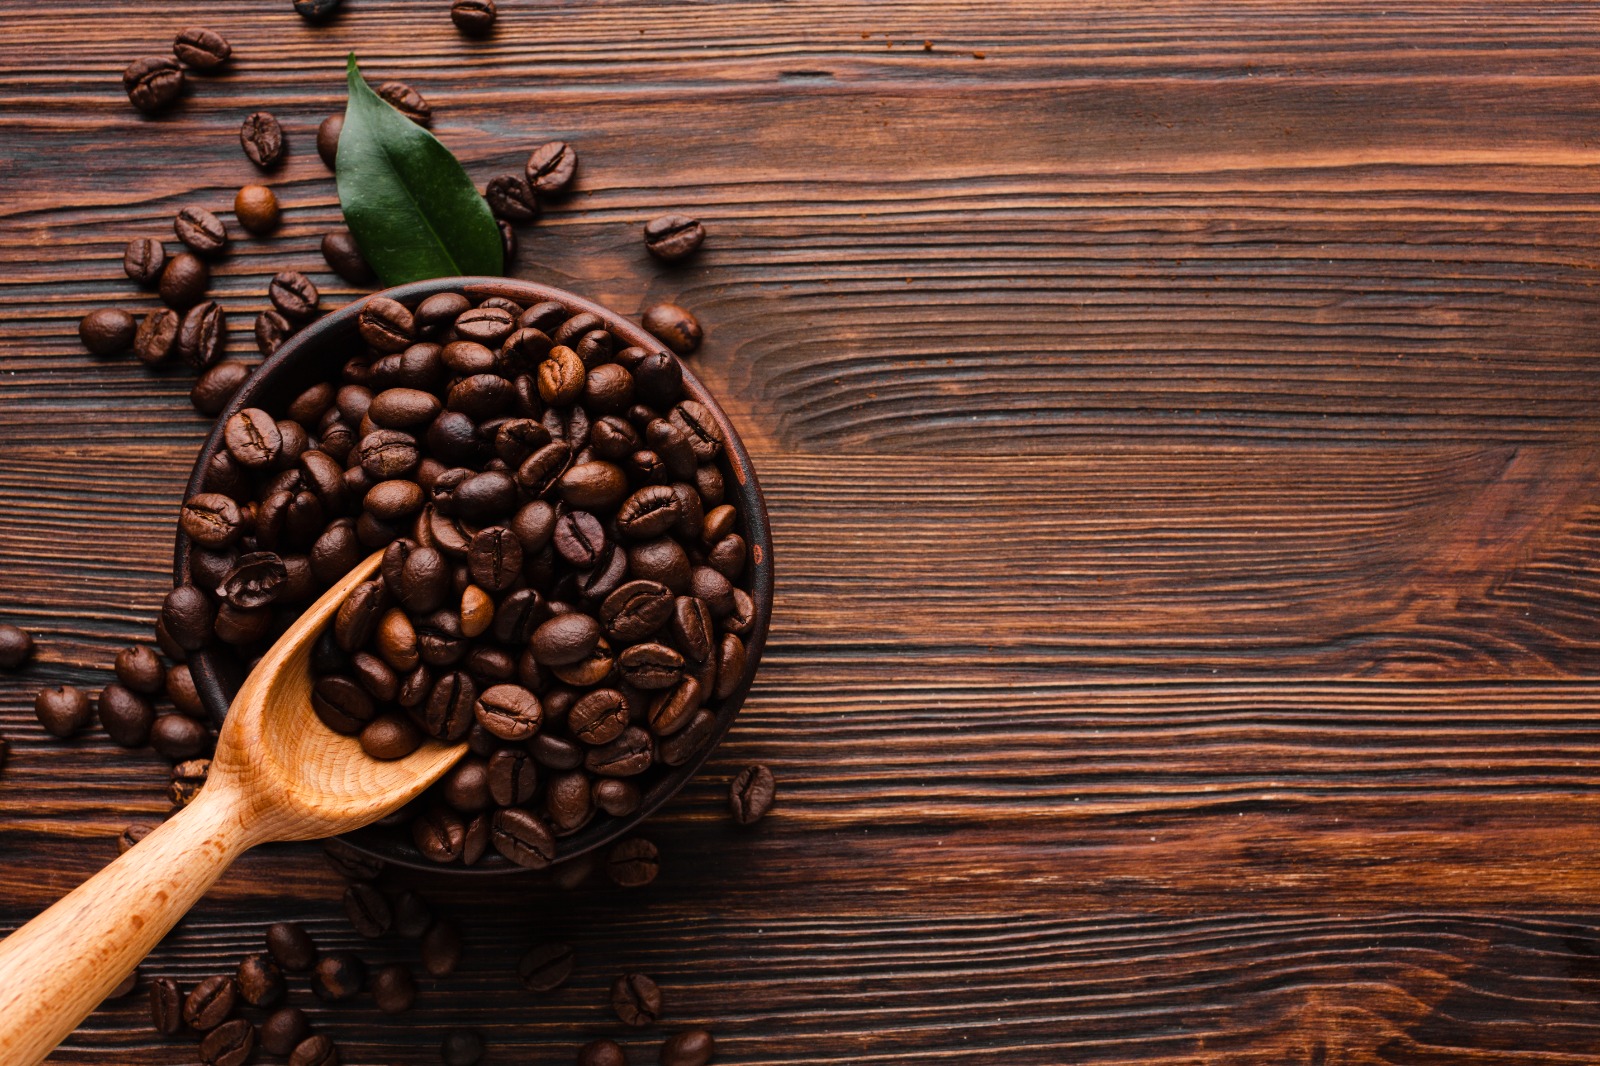 Types of Coffee beans